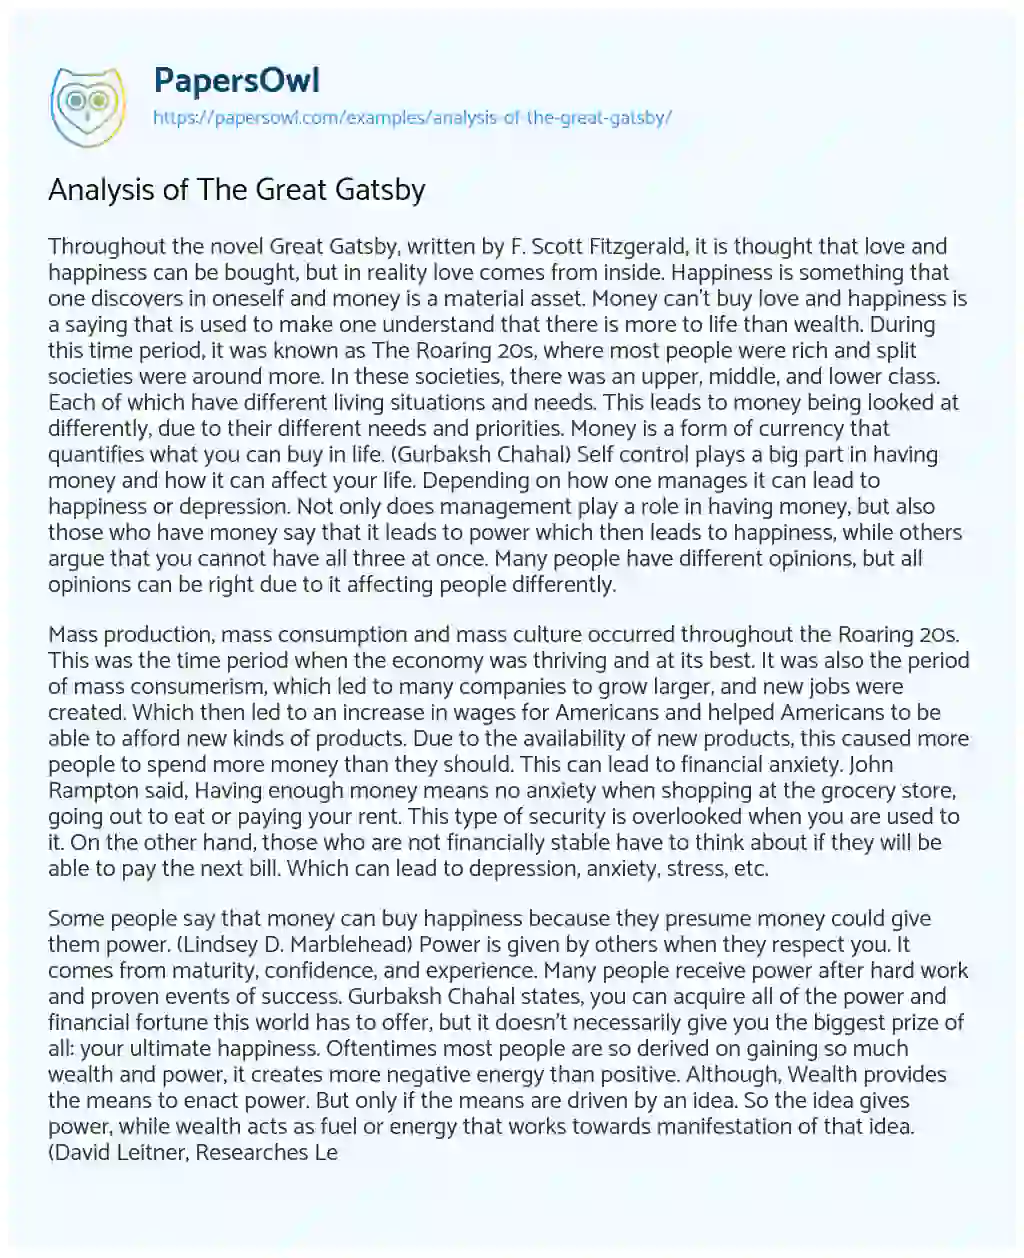 Essay on Analysis of the Great Gatsby